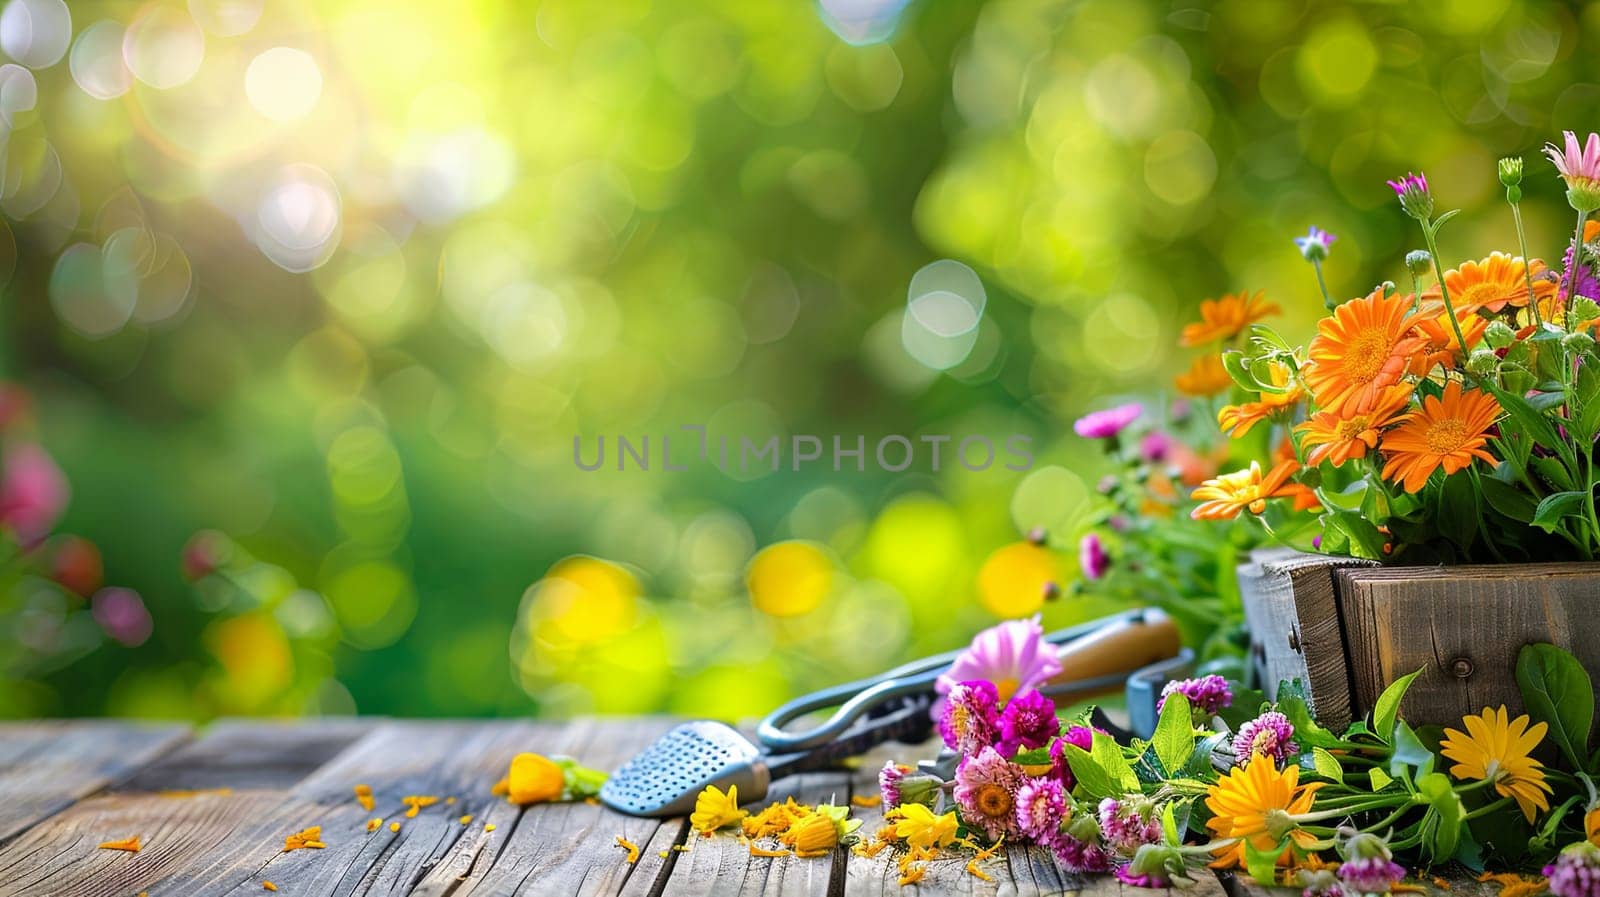 Various colorful flowers and garden tools arranged neatly on a wooden table, set against a blurred natural background.